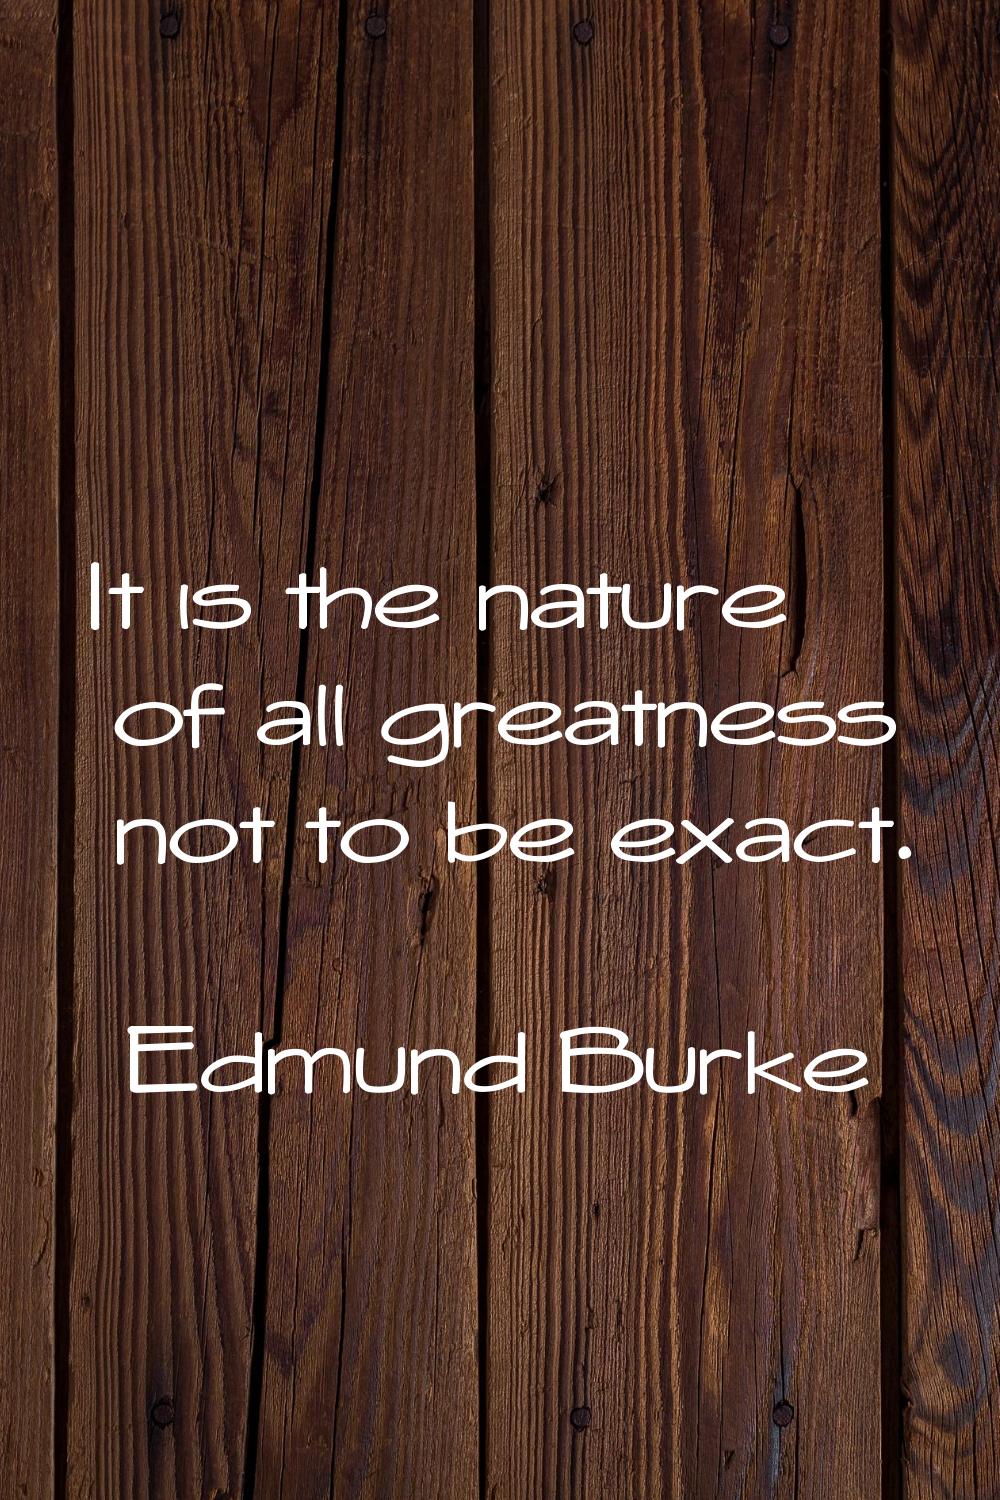 It is the nature of all greatness not to be exact.